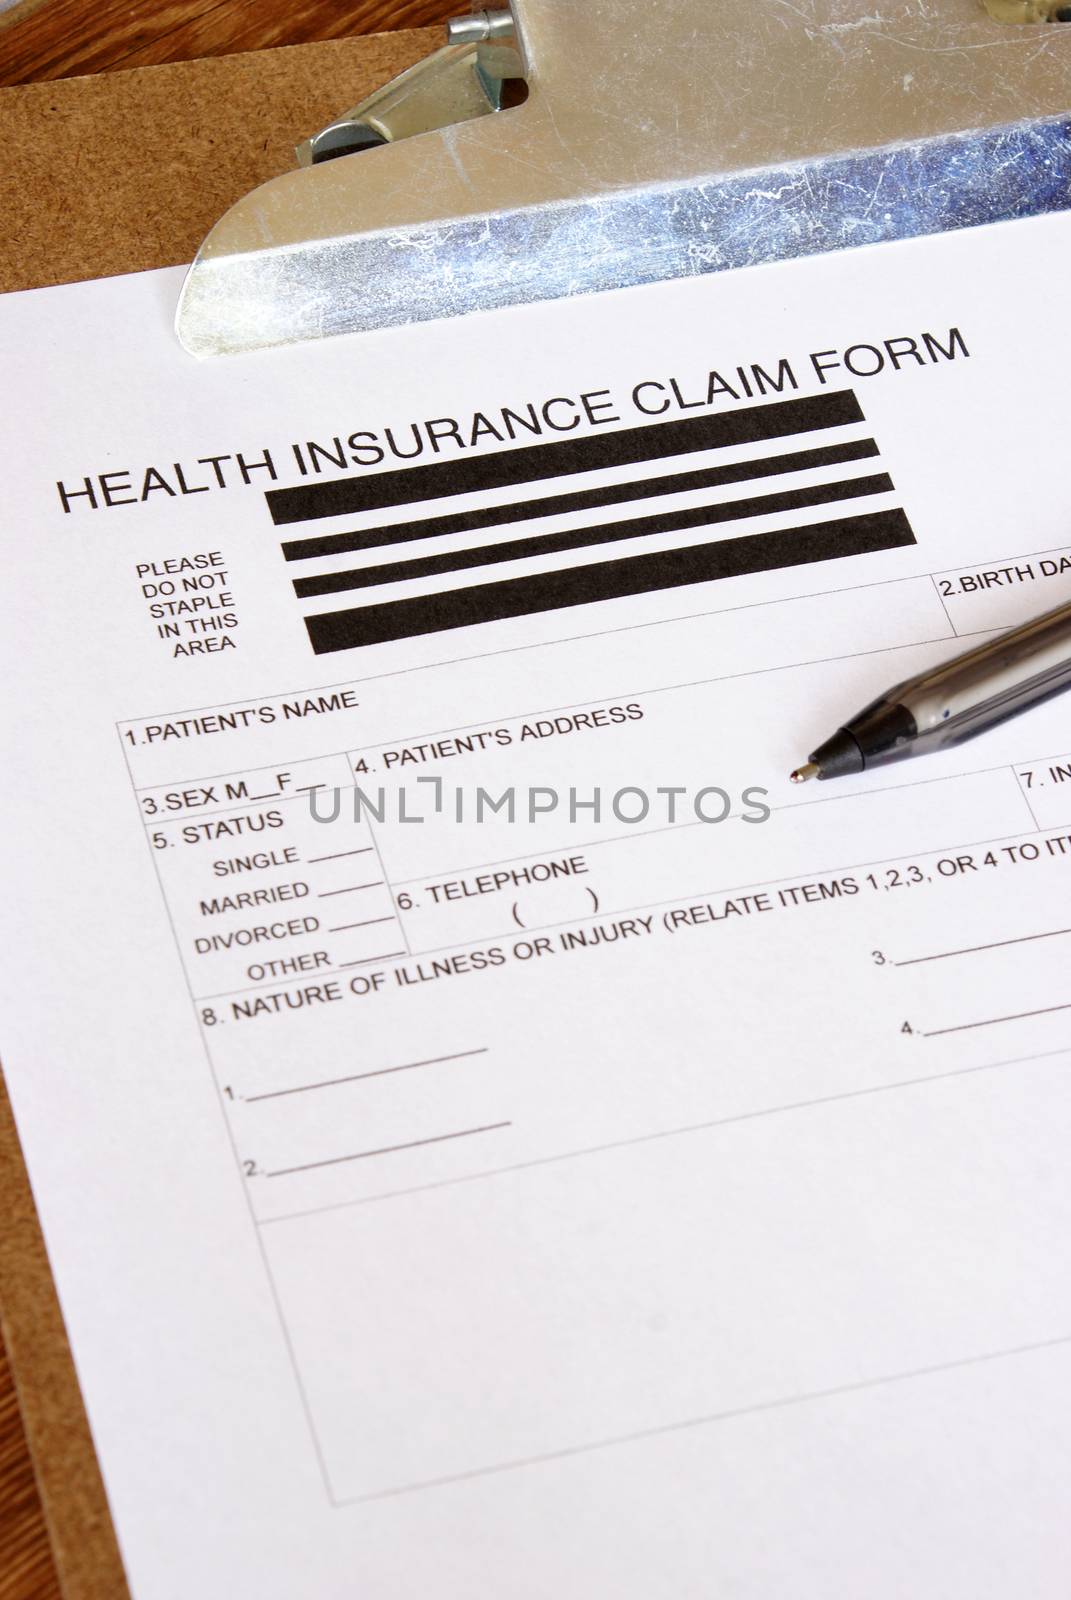 A closeup of a blank health insurance claim form for a patients information.